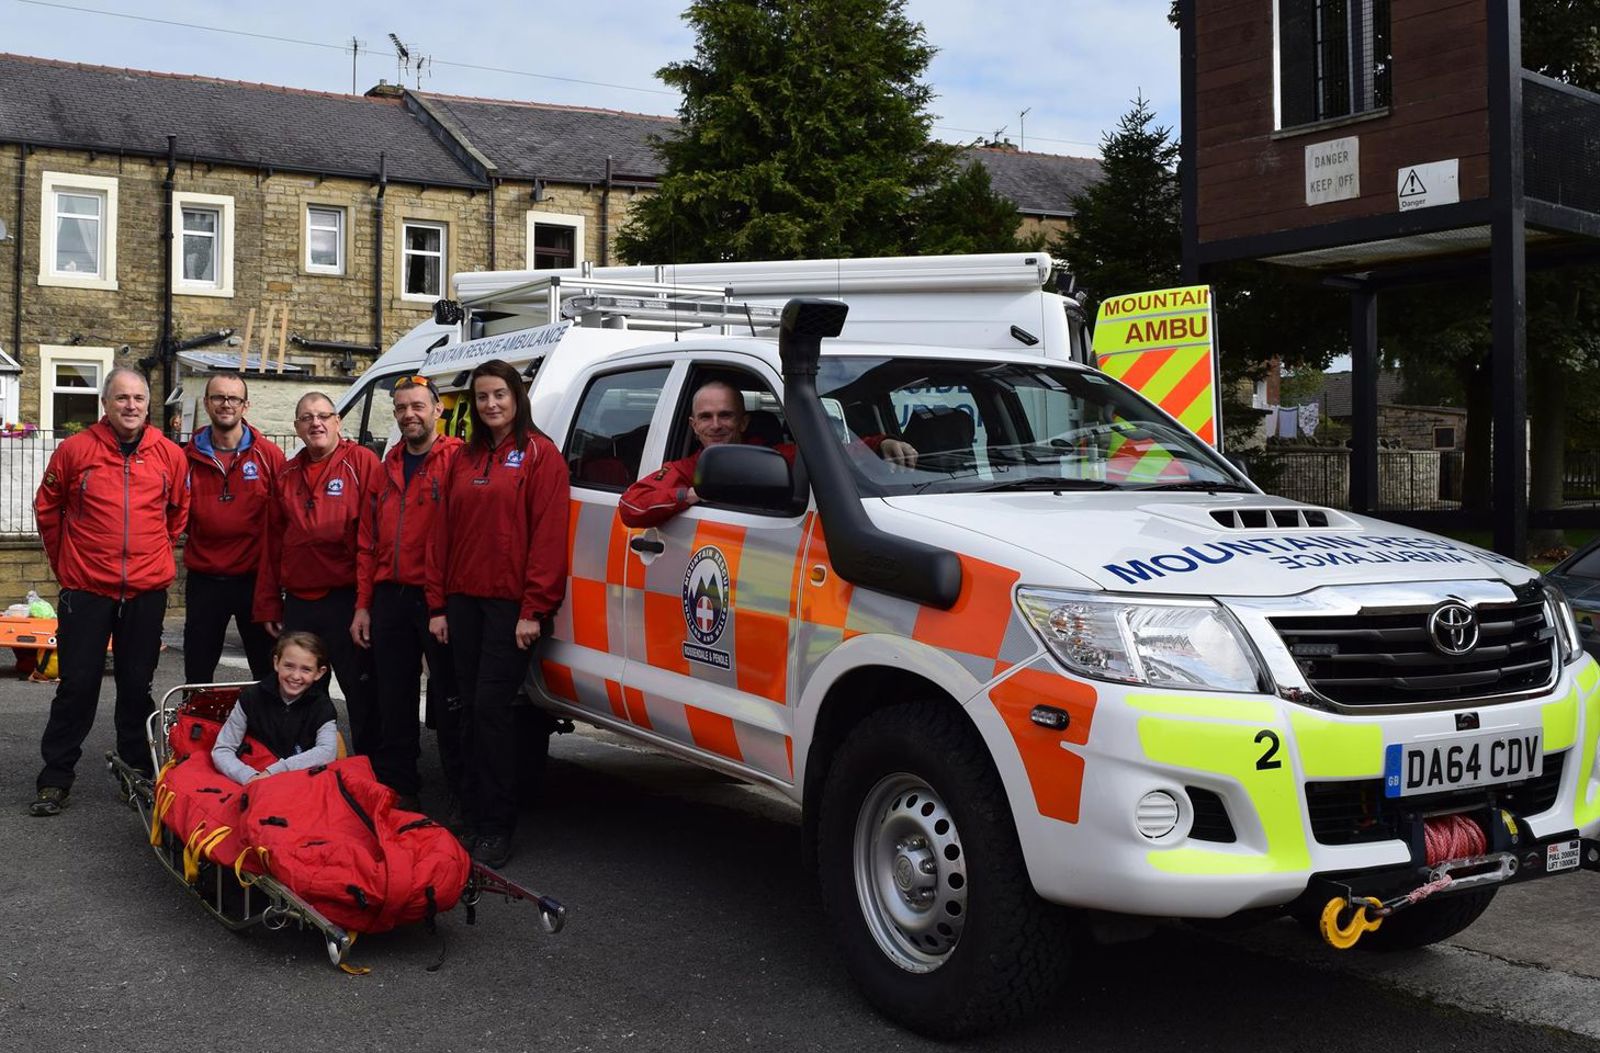 Rossendale And Pendle Mountain Rescue Team standing with emergency vehicle